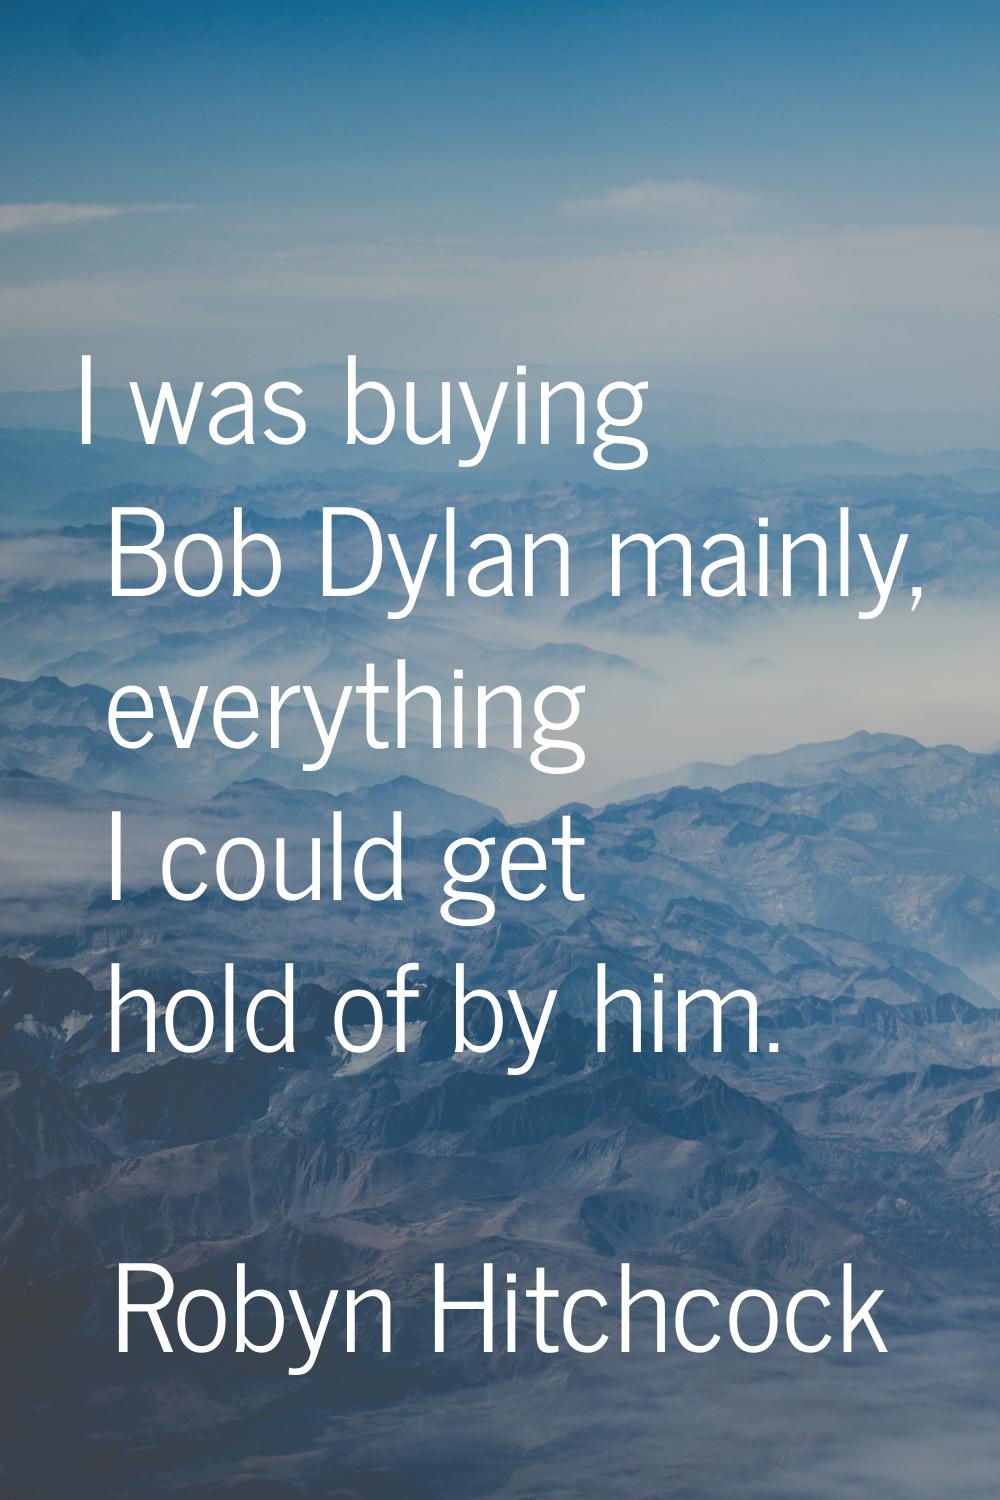 I was buying Bob Dylan mainly, everything I could get hold of by him.